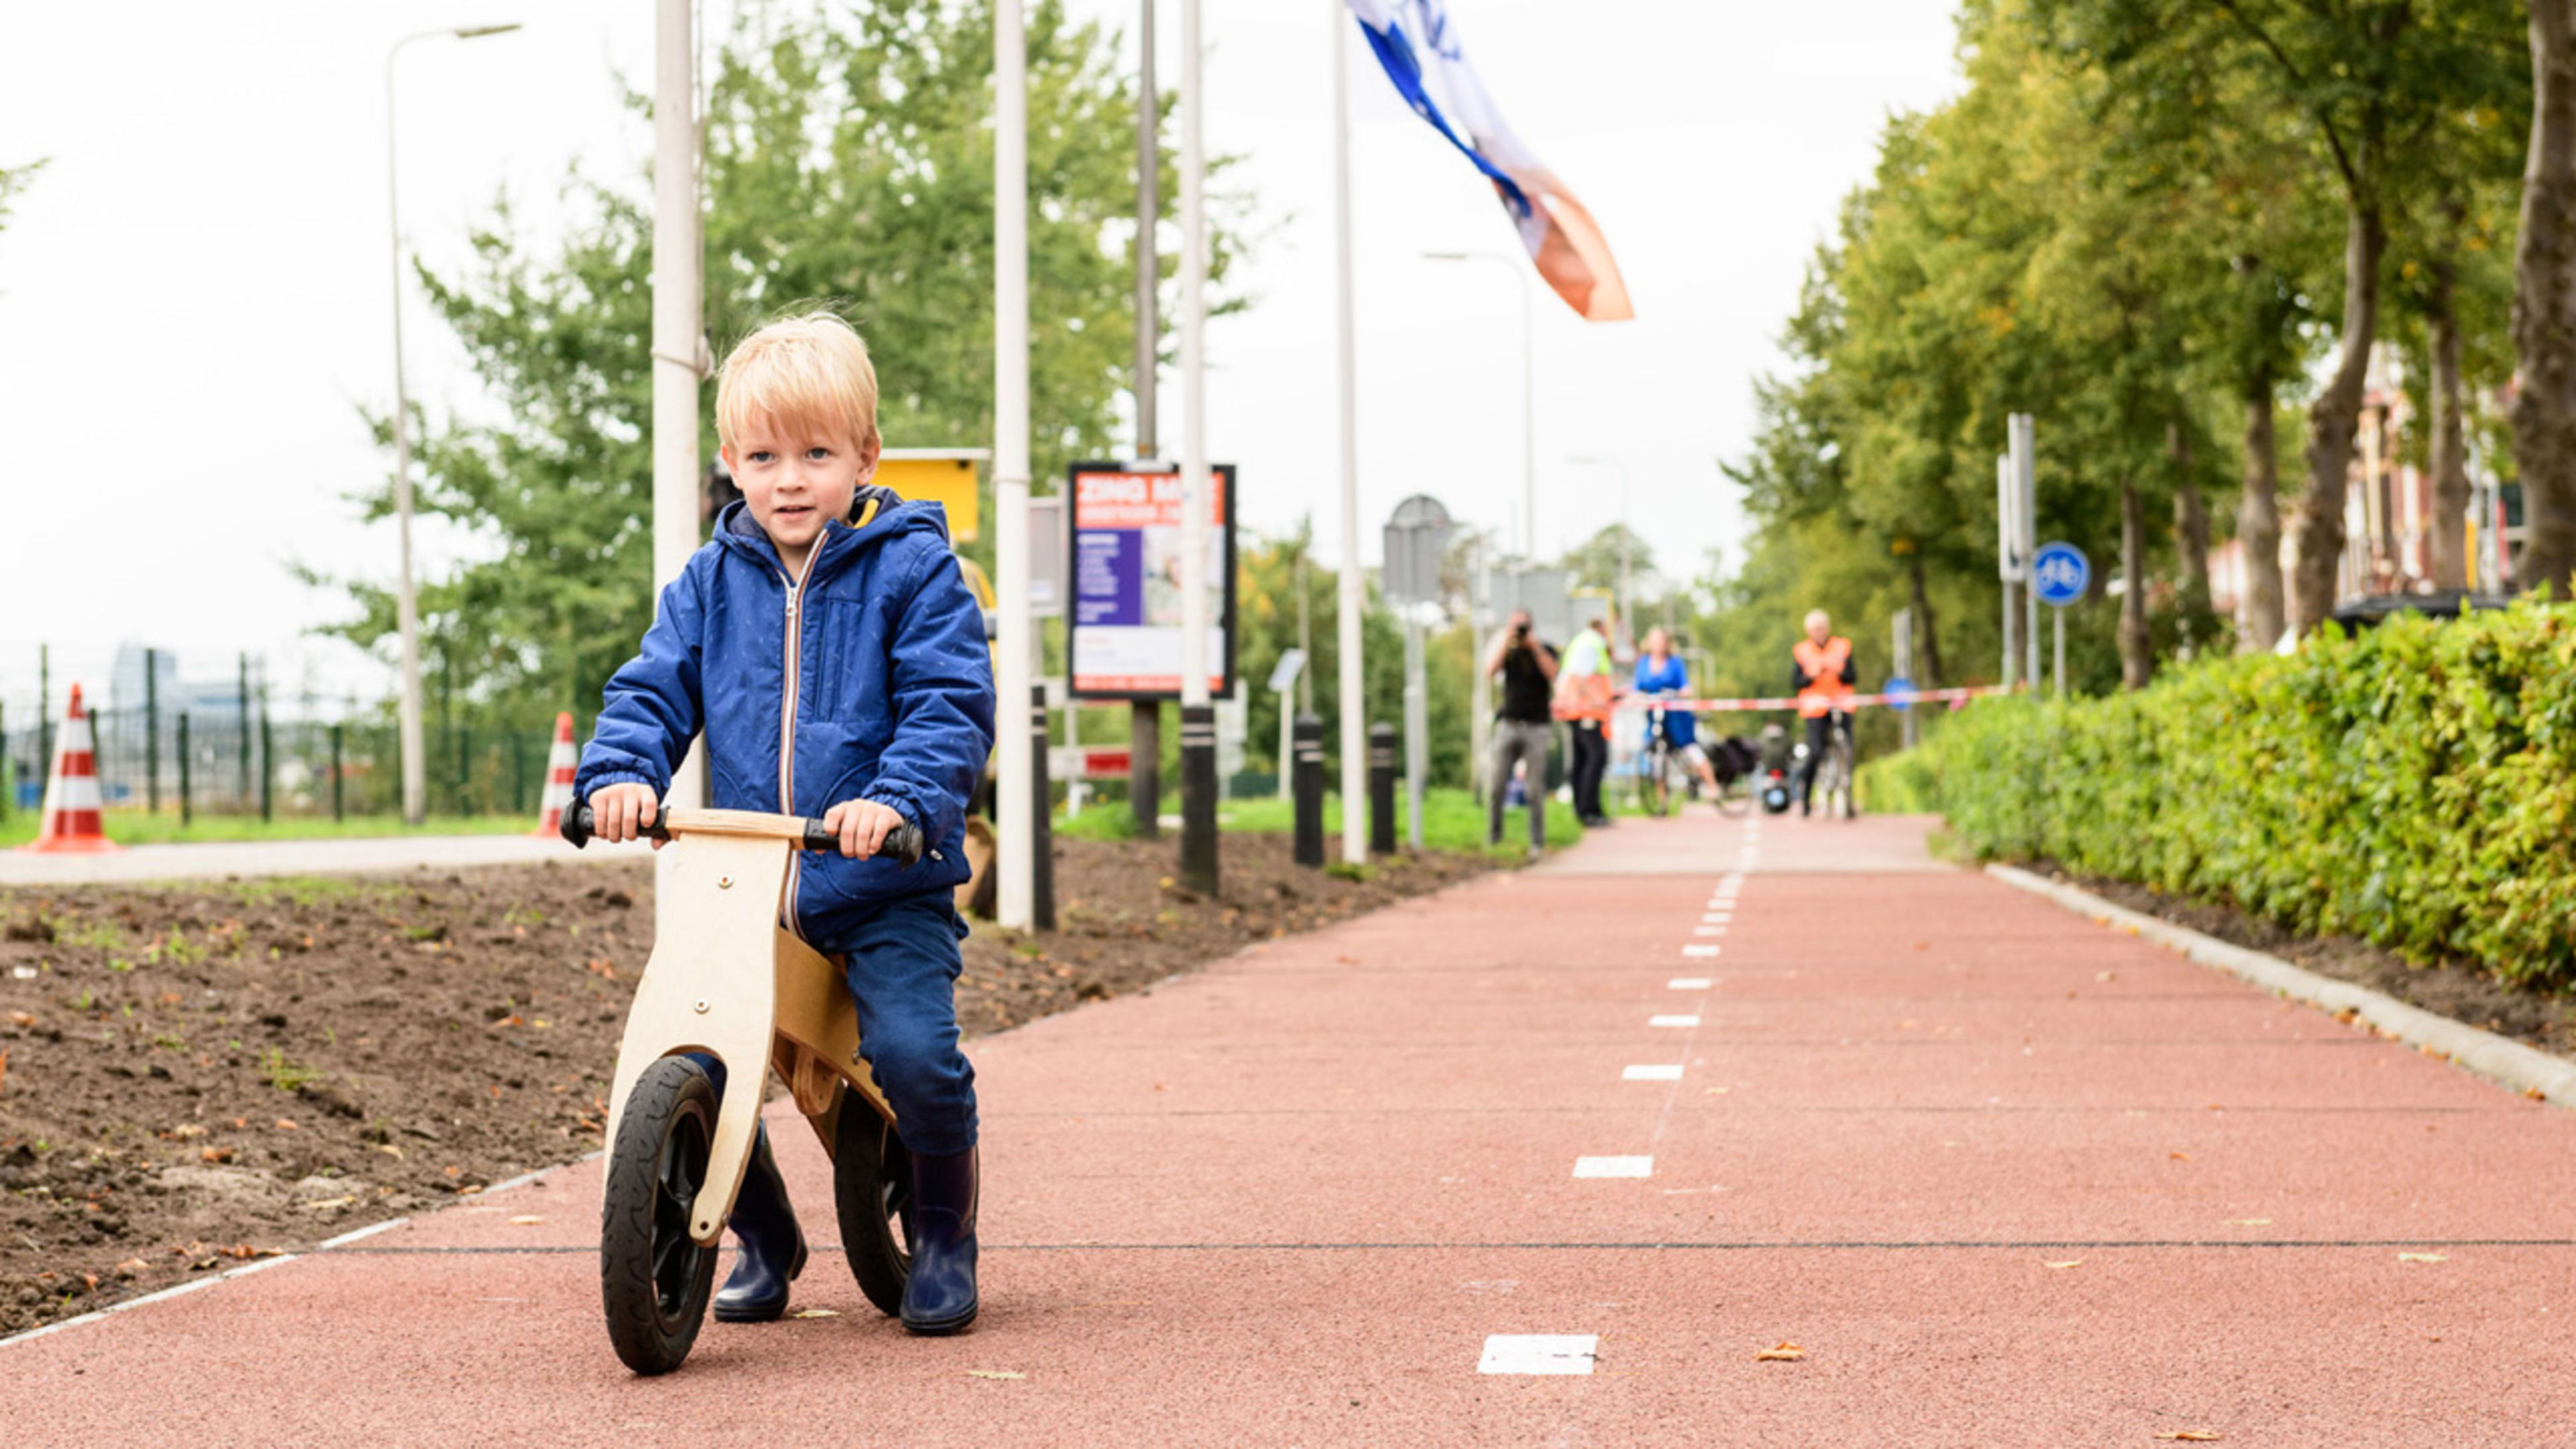 This bike path is made from recycled plastic